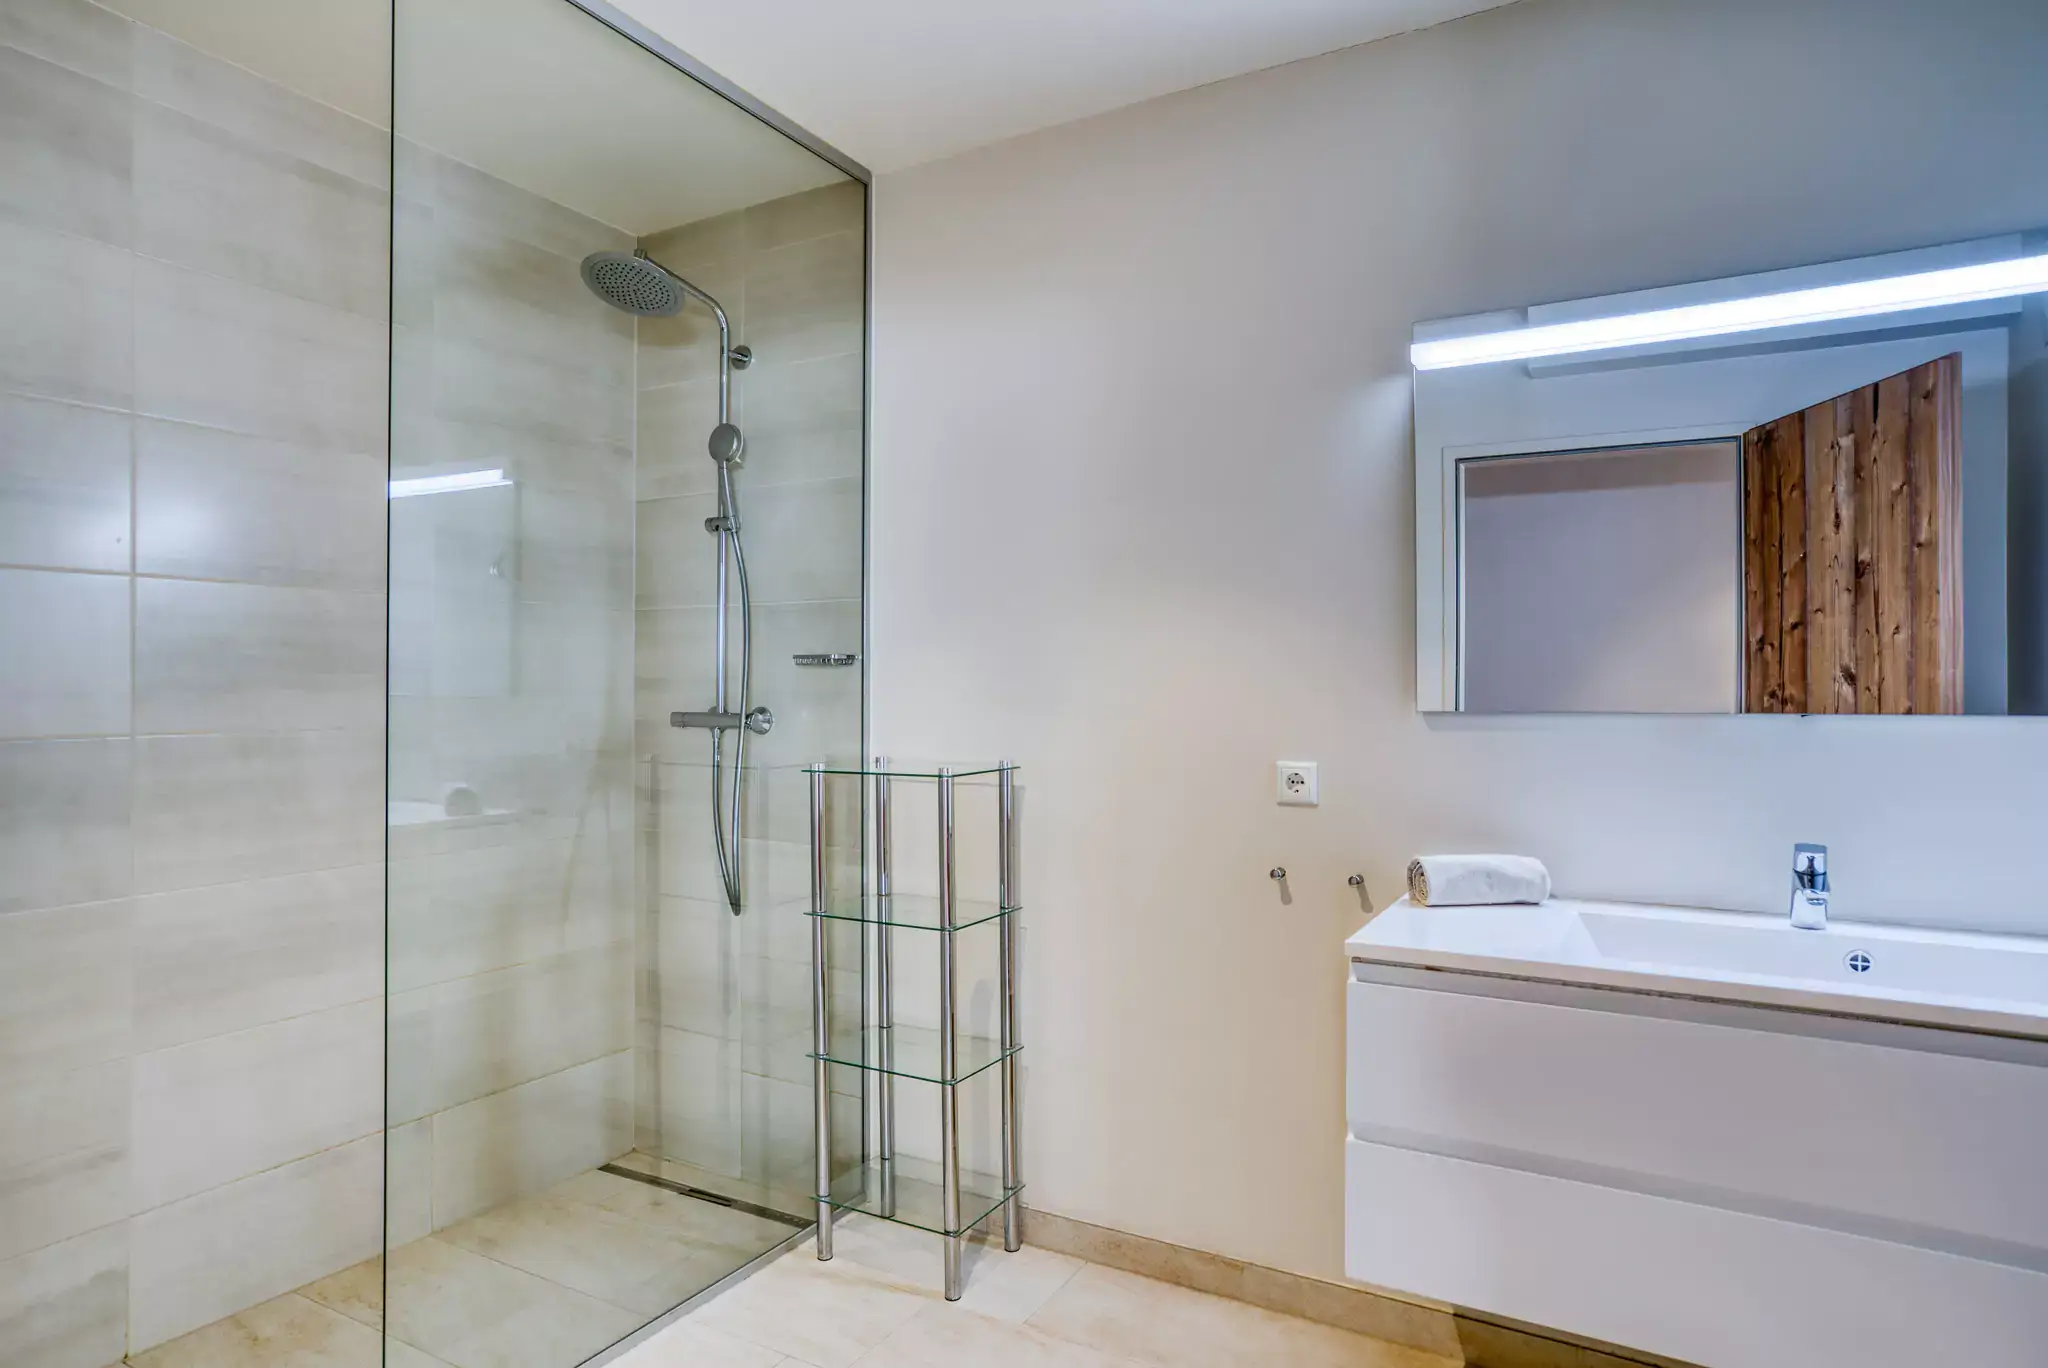 Bathroom with shower of the apartment Skypine in the COOEE alpin Hotel Dachstein in Gosau.